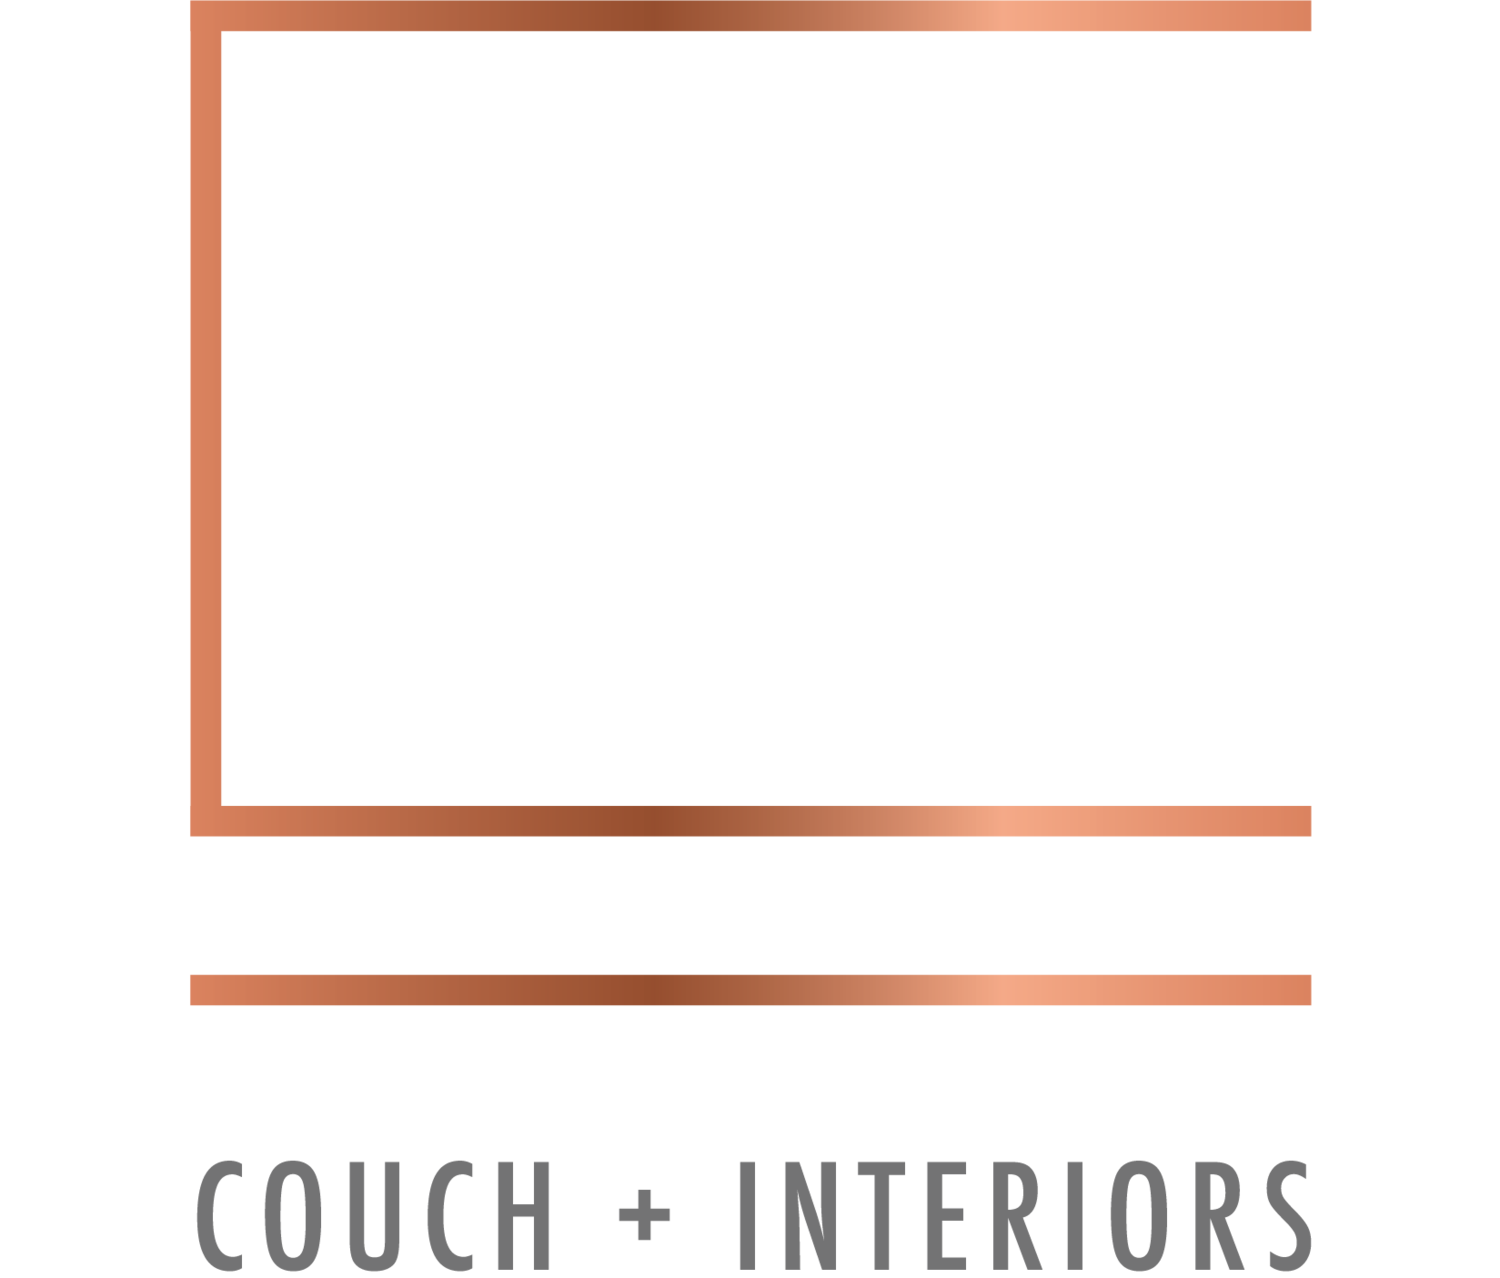 Couch + Interiors